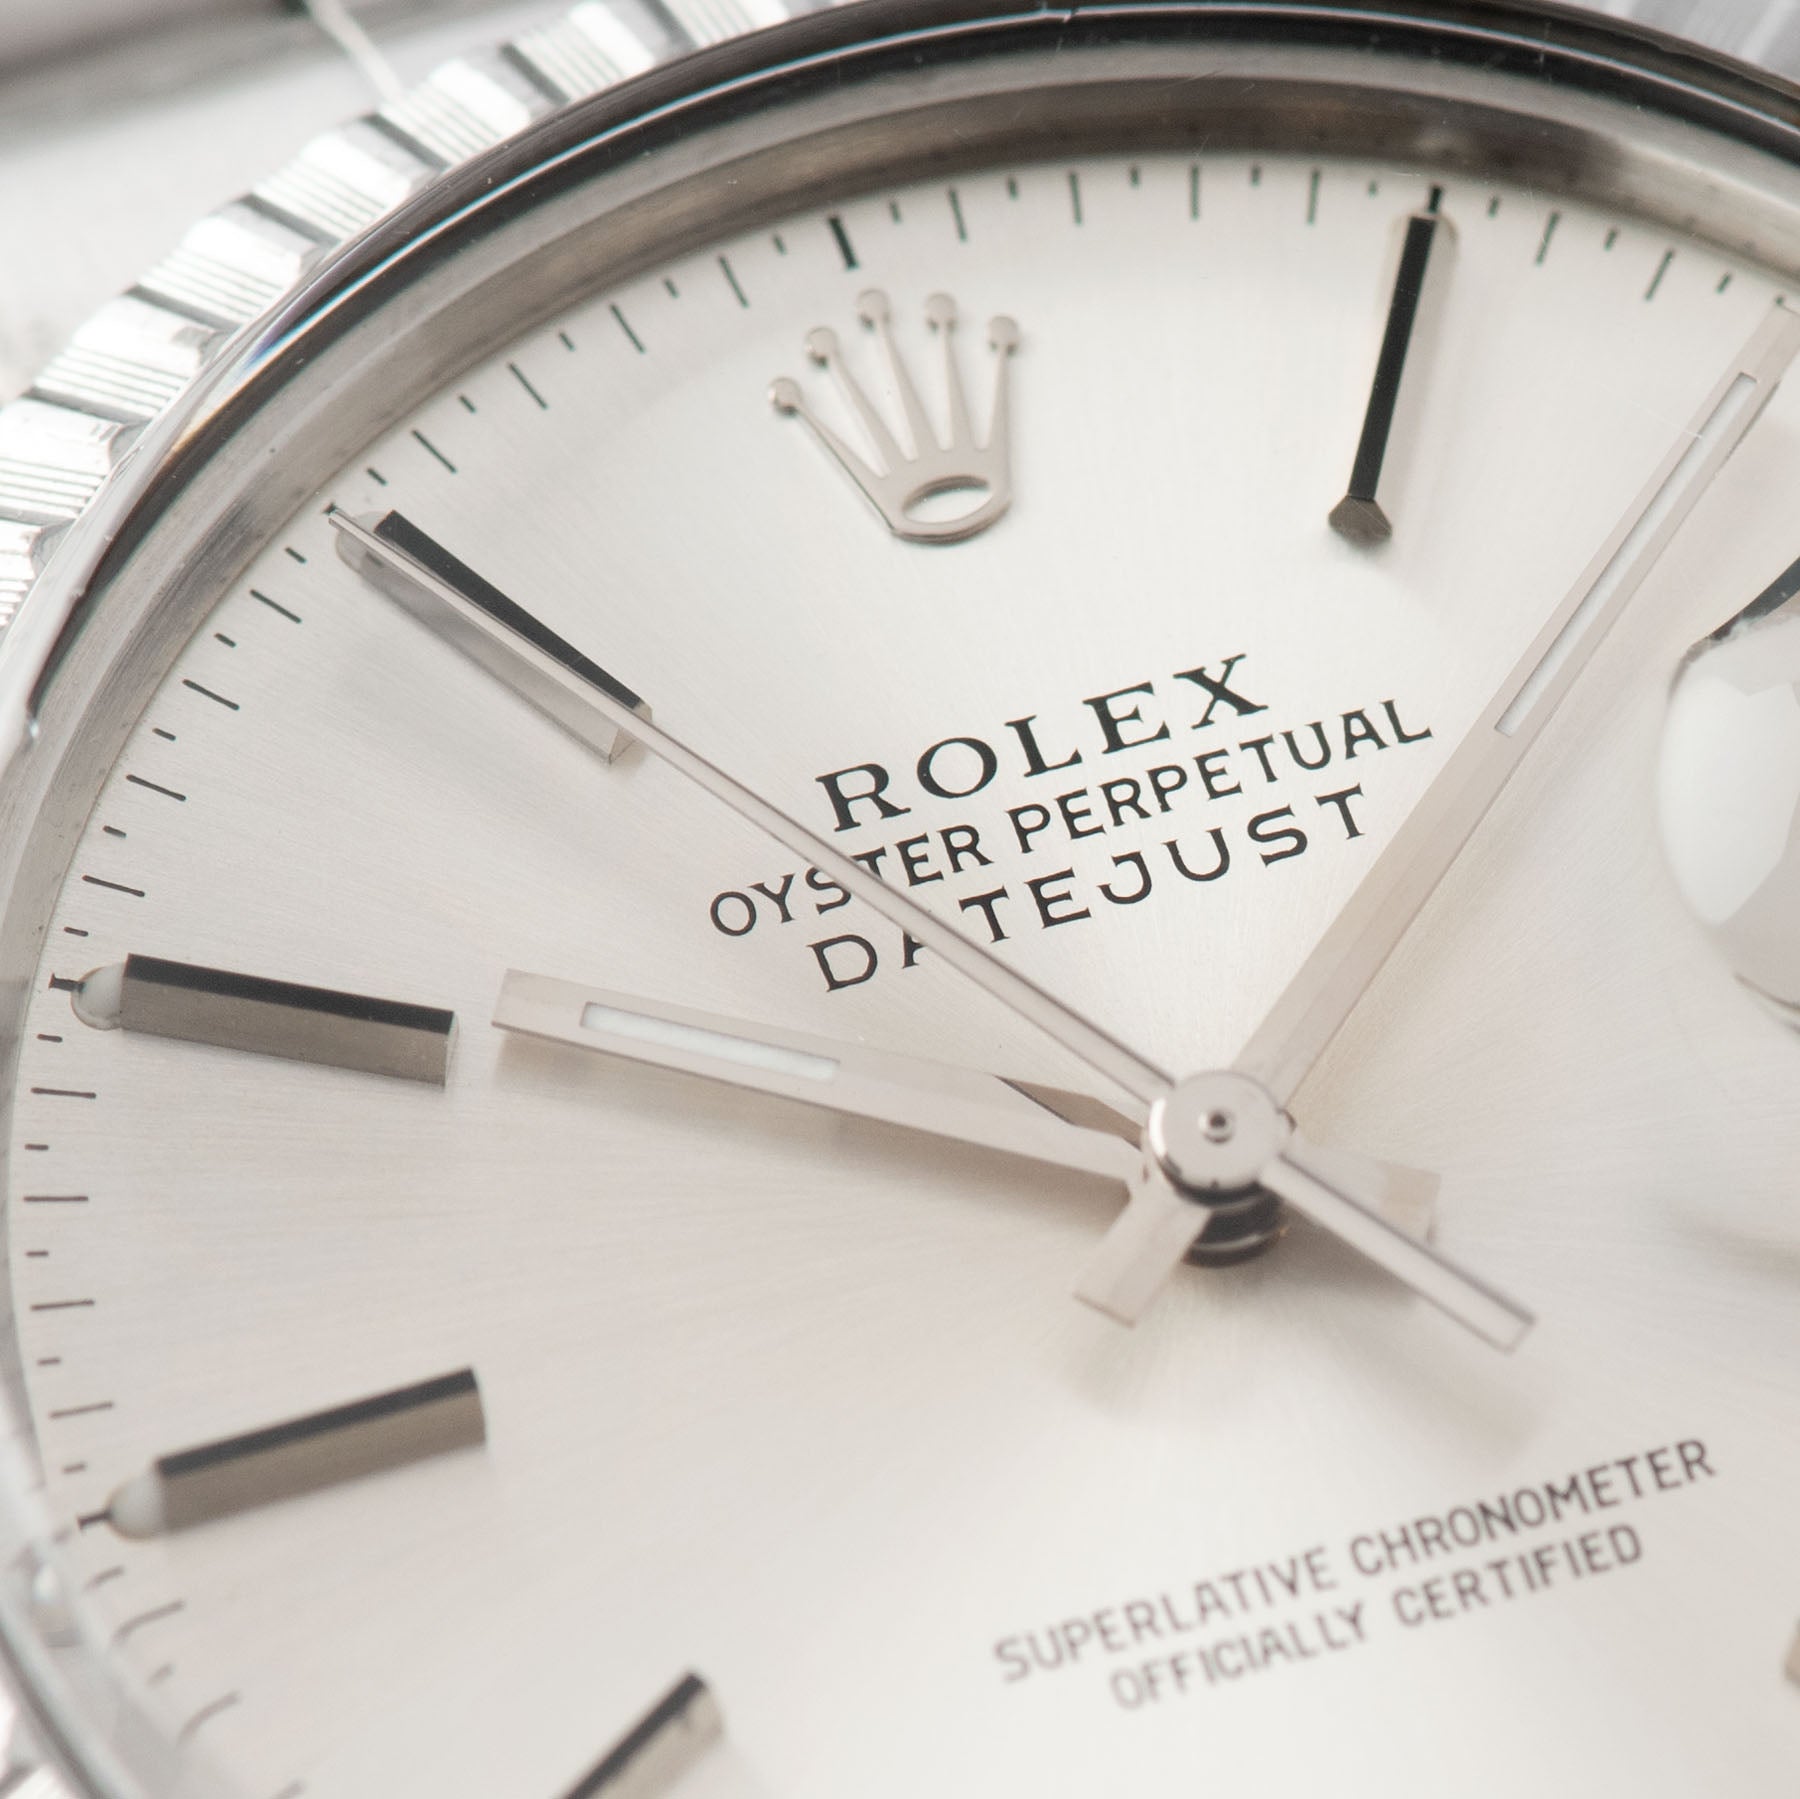 Rolex Datejust Silver Dial 16030